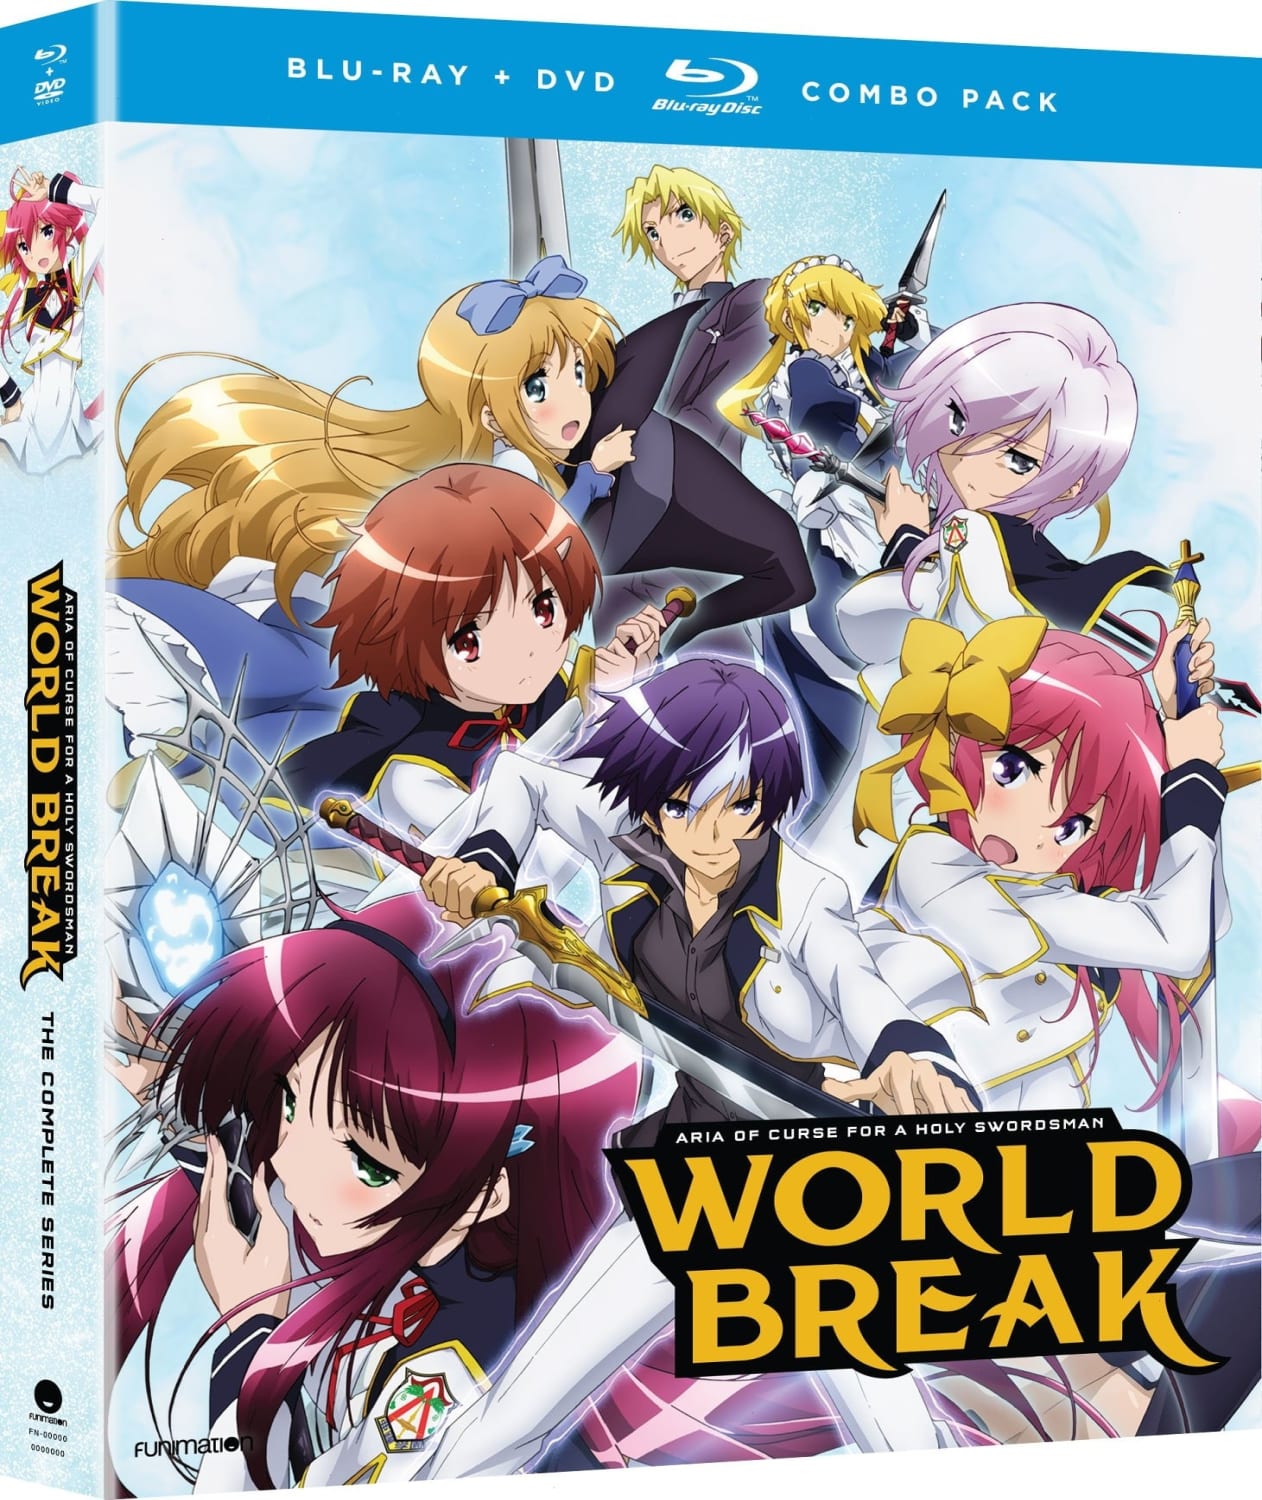 World Break: Aria of Curse for a Holy Swordsman – The Complete Series (Blu-ray) on MovieShack